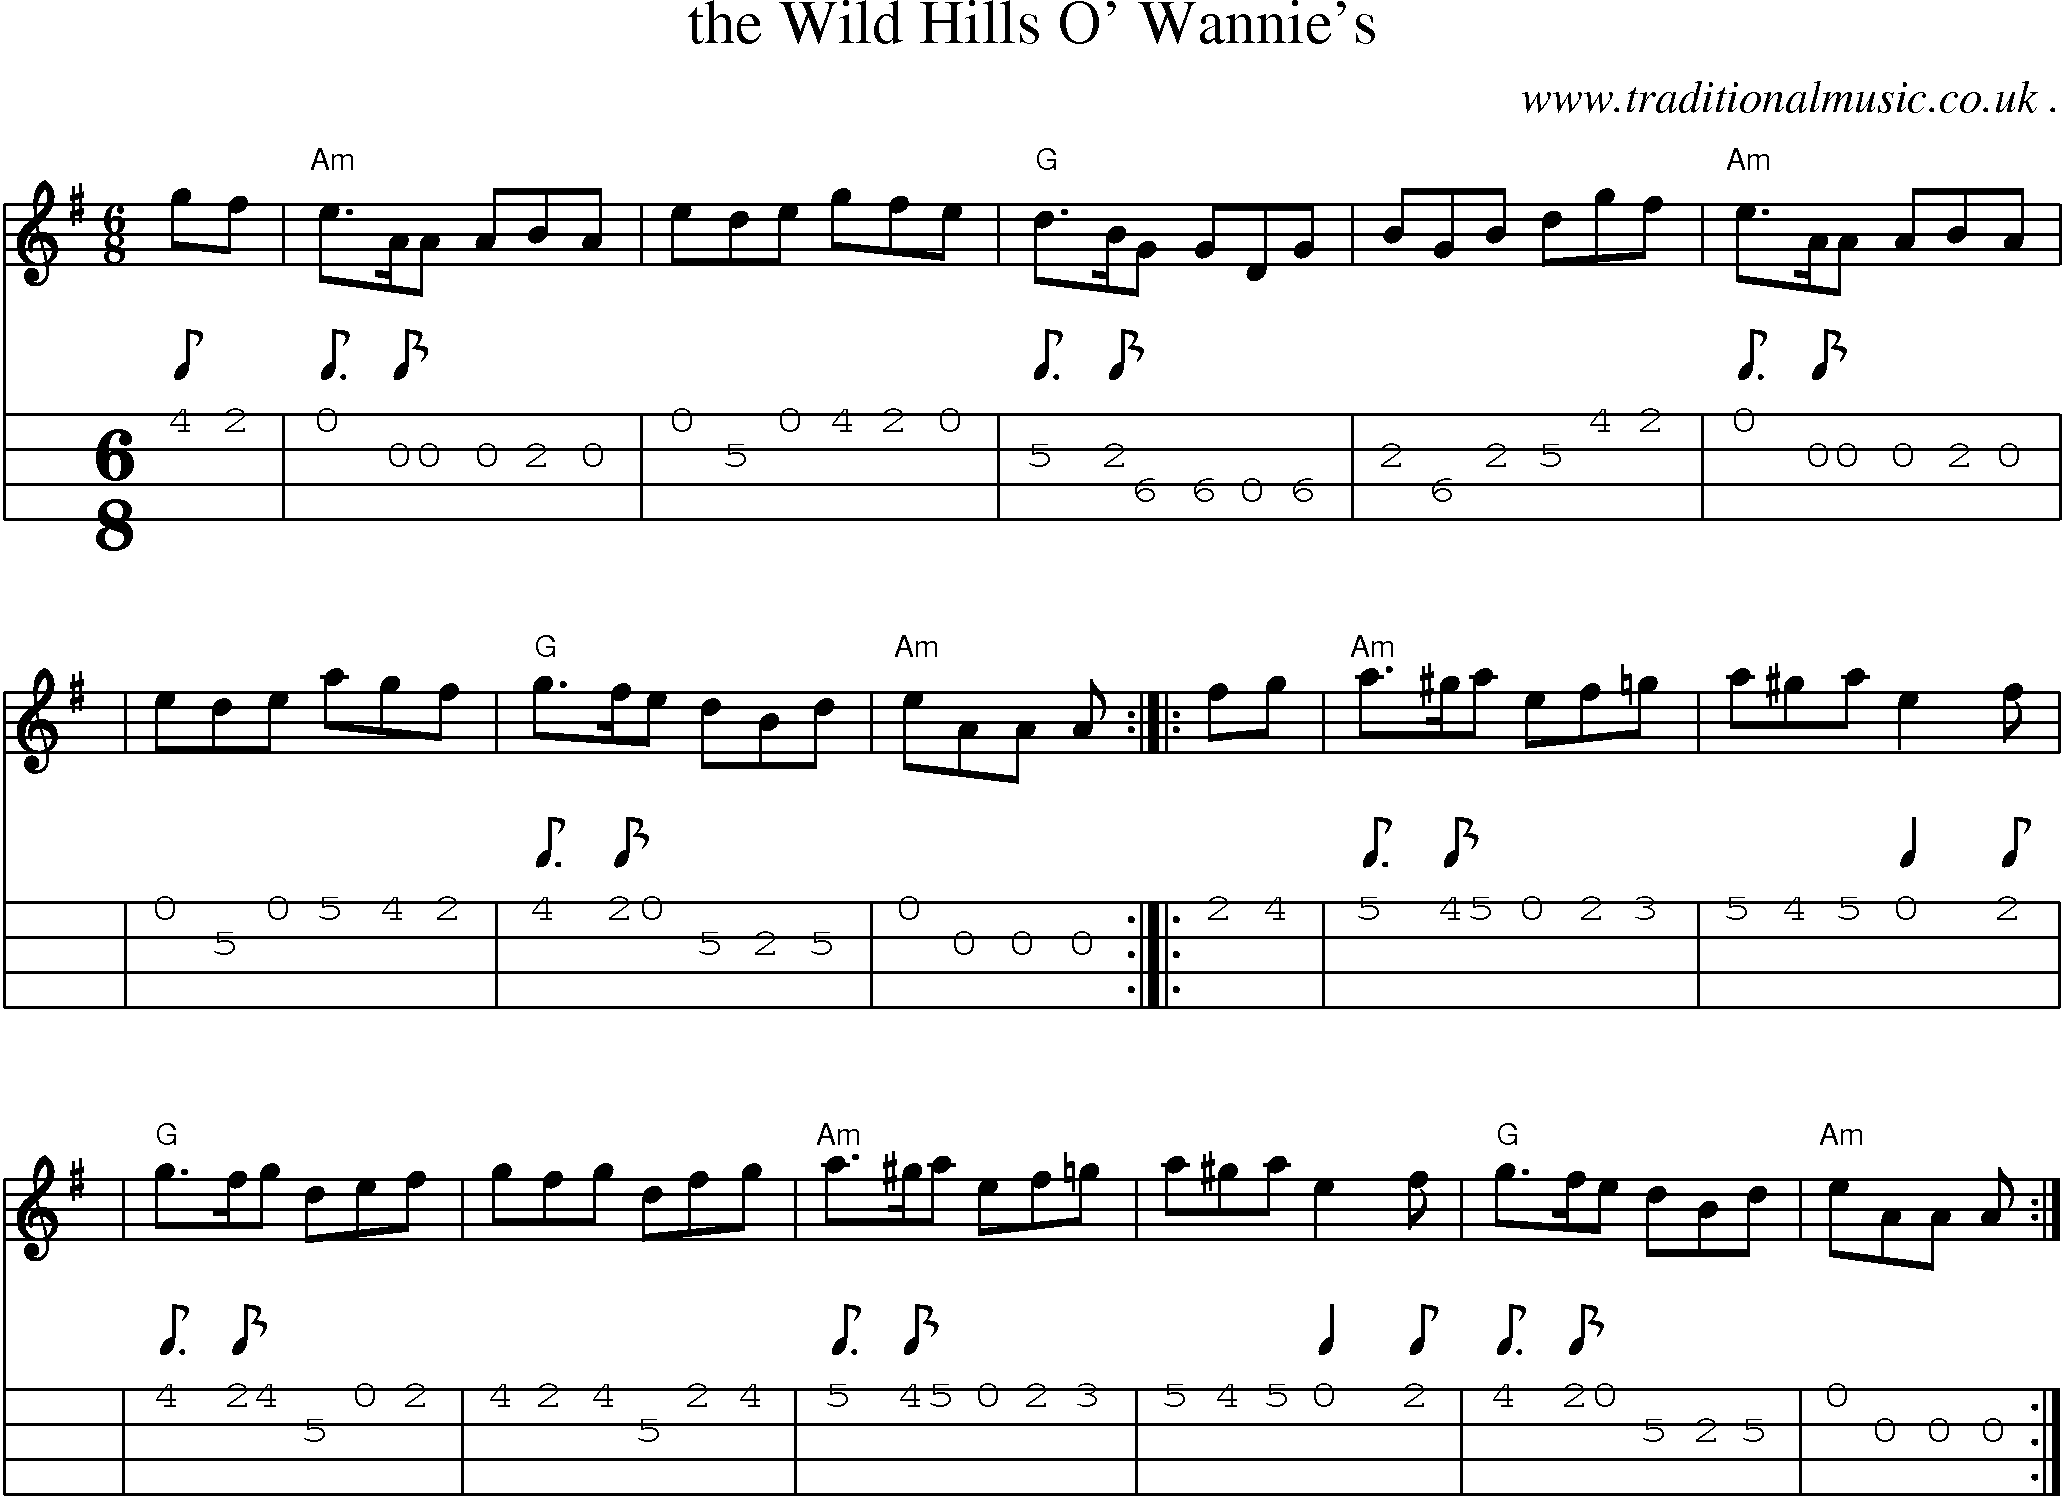 Sheet-music  score, Chords and Mandolin Tabs for The Wild Hills O Wannies